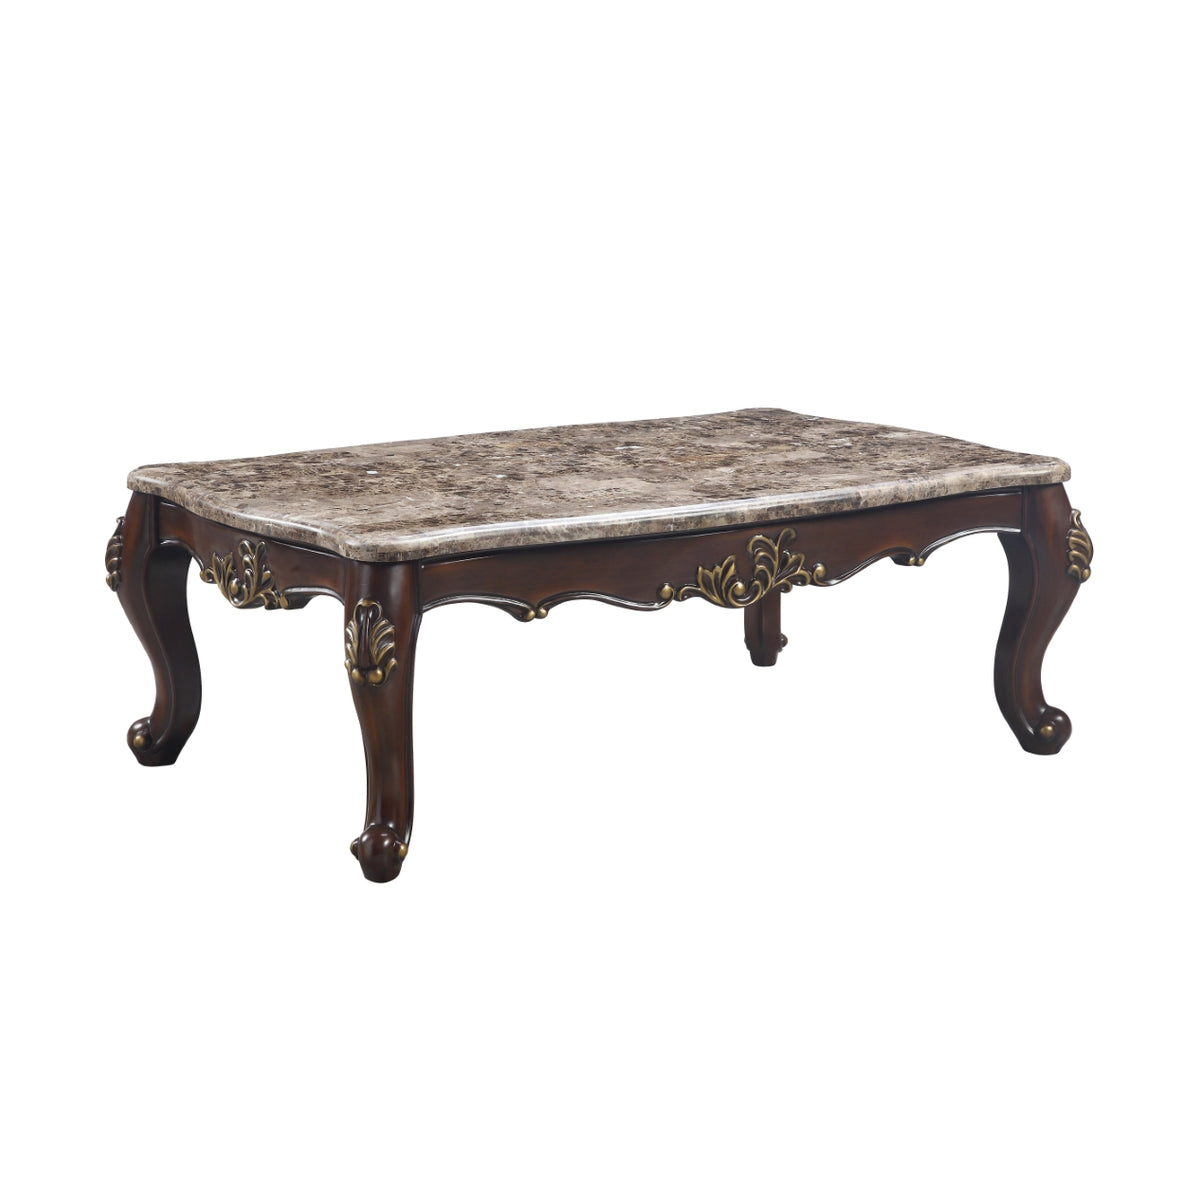 Kha 56 Inch Marble Top Coffee Table With Gold Floral Trim, Cherry Brown- Saltoro Sherpi